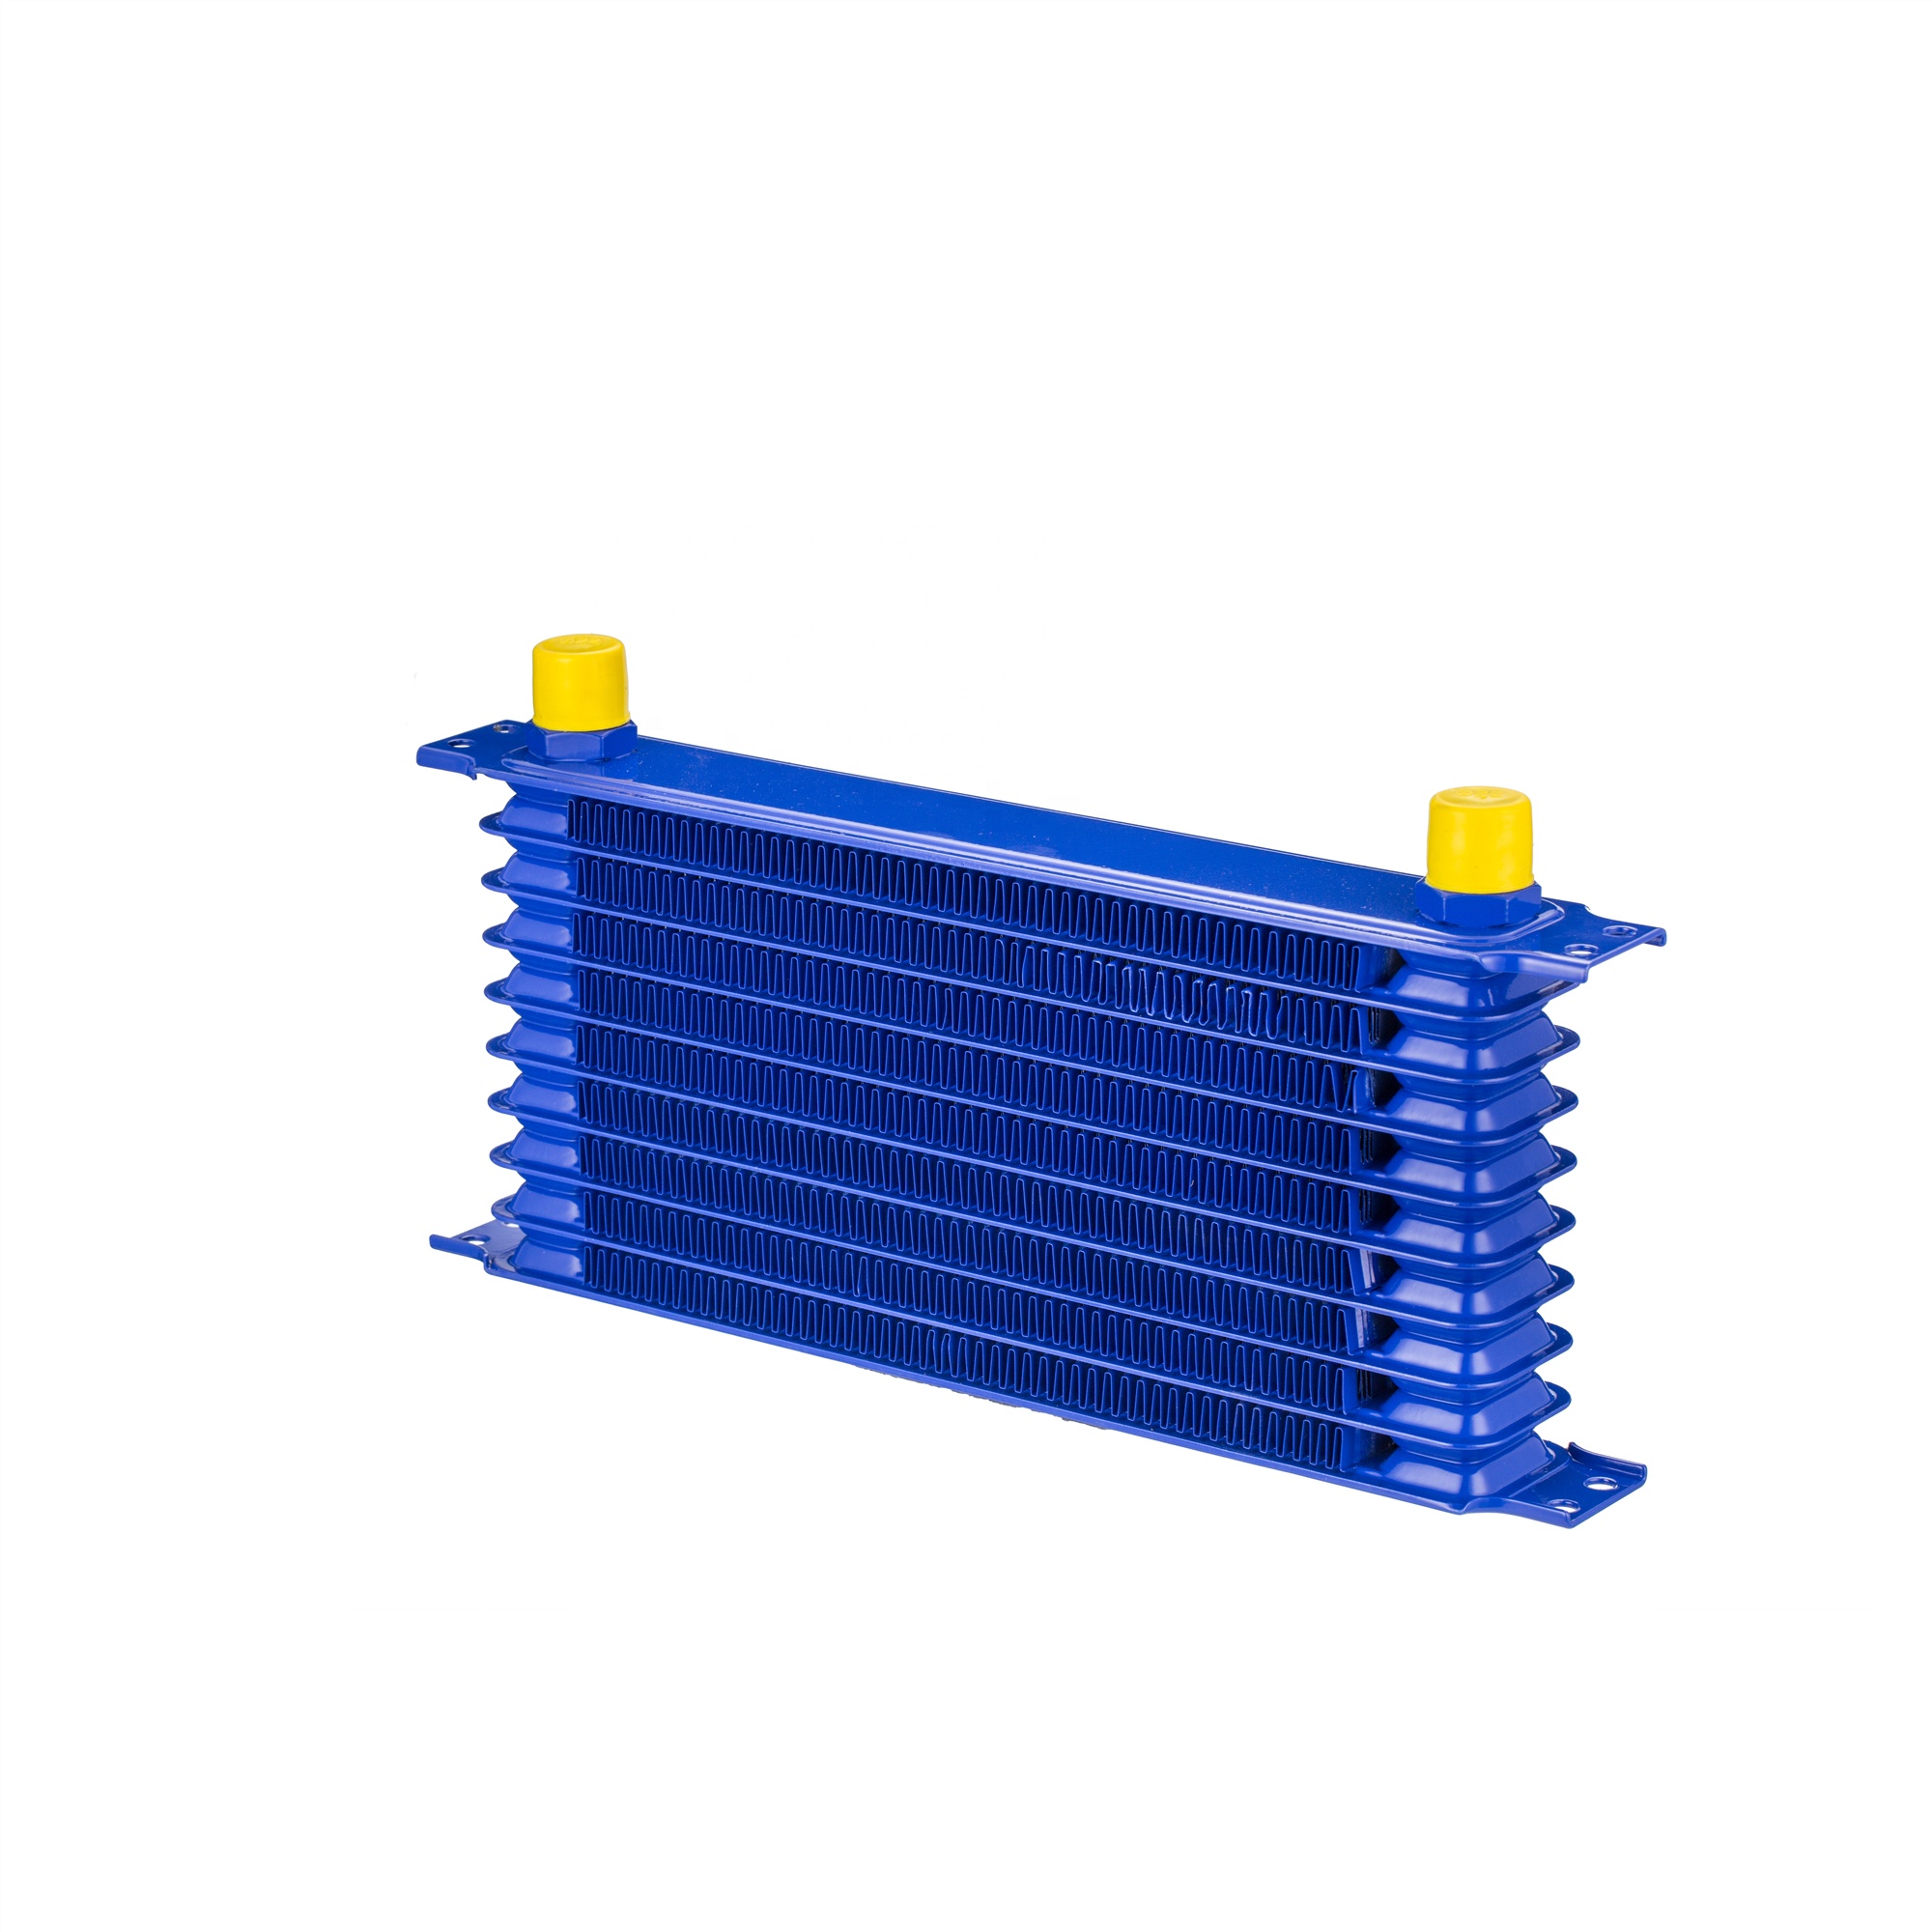 Factory wholesale Hydraulic Oil Cooler Radiator - HaoFa Universal Japanese AN10 Inlet 10 Row Aluminum Transmission or Engine Oil Cooler – Blue – HaoFa